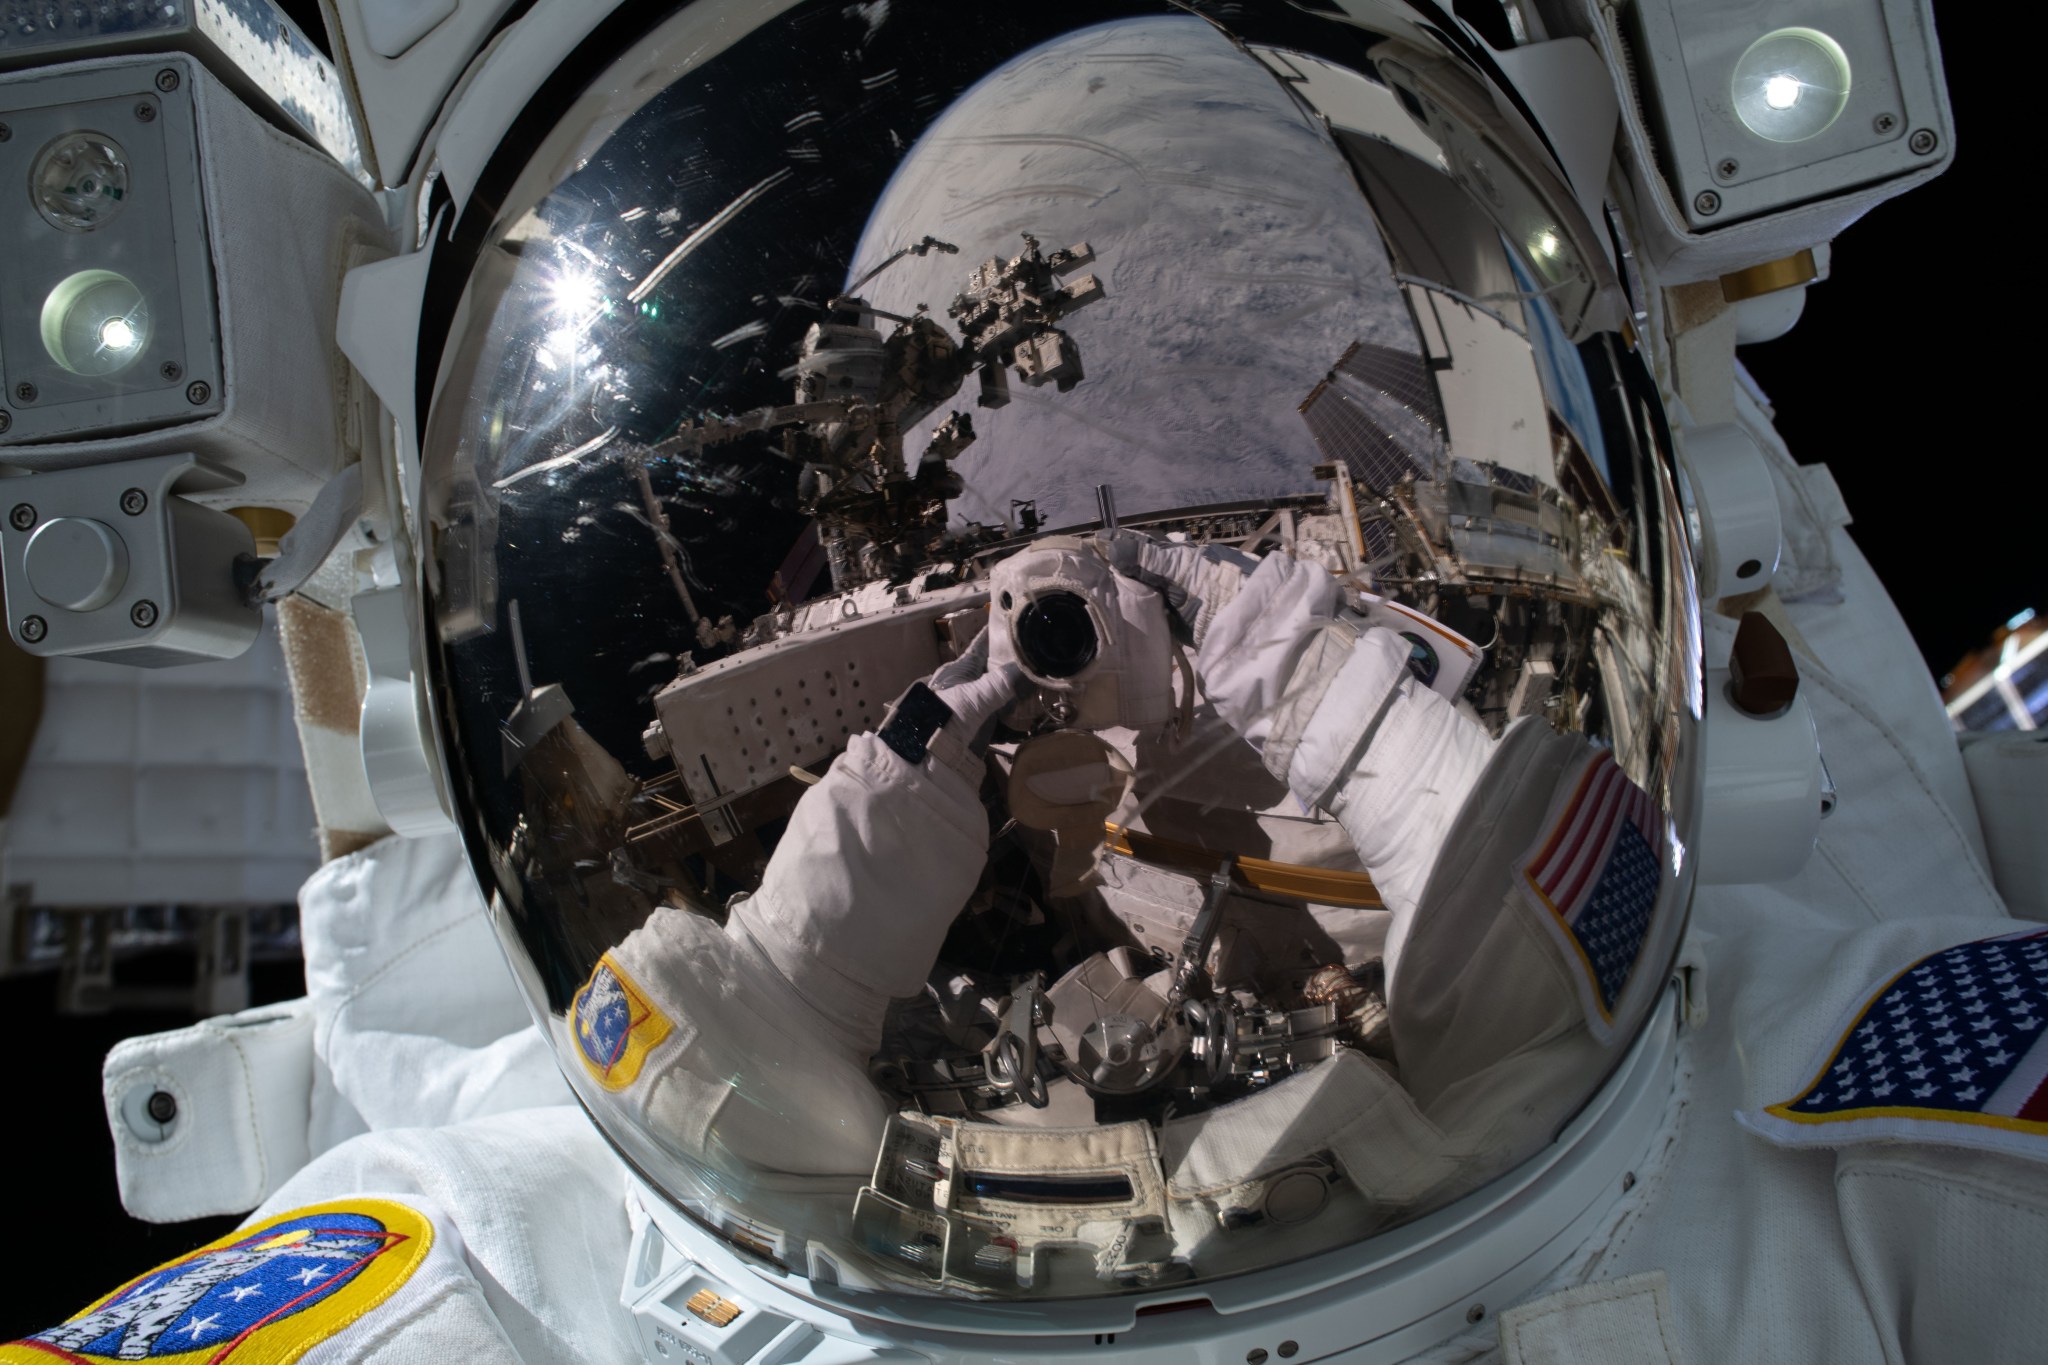 NASA spacewalker Kayla Barron points the camera toward herself and takes an out-of-this-world "space-selfie."